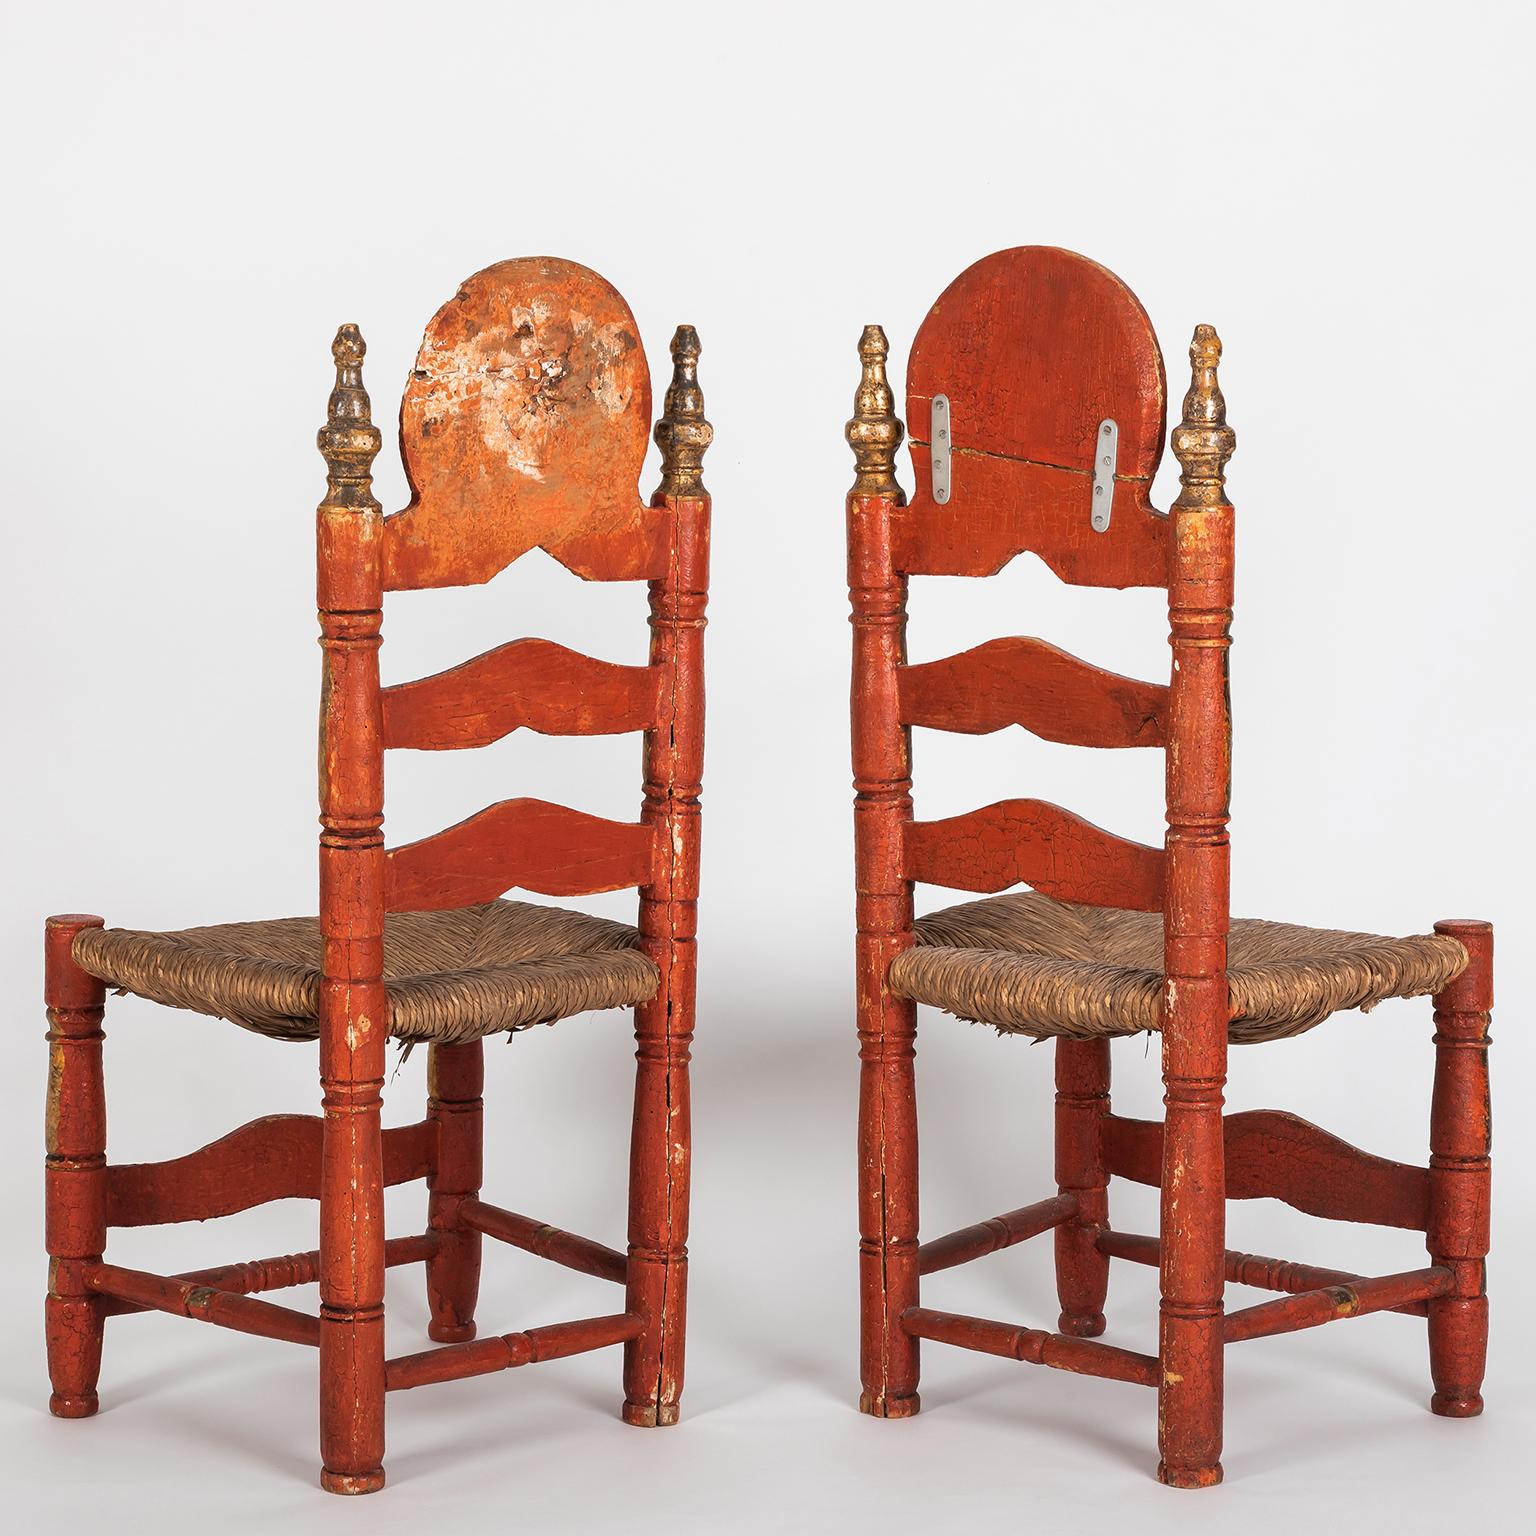 Hand-Carved Pair of 18th Century Spanish Style Ladder Back Painted Chairs with Rush Seats